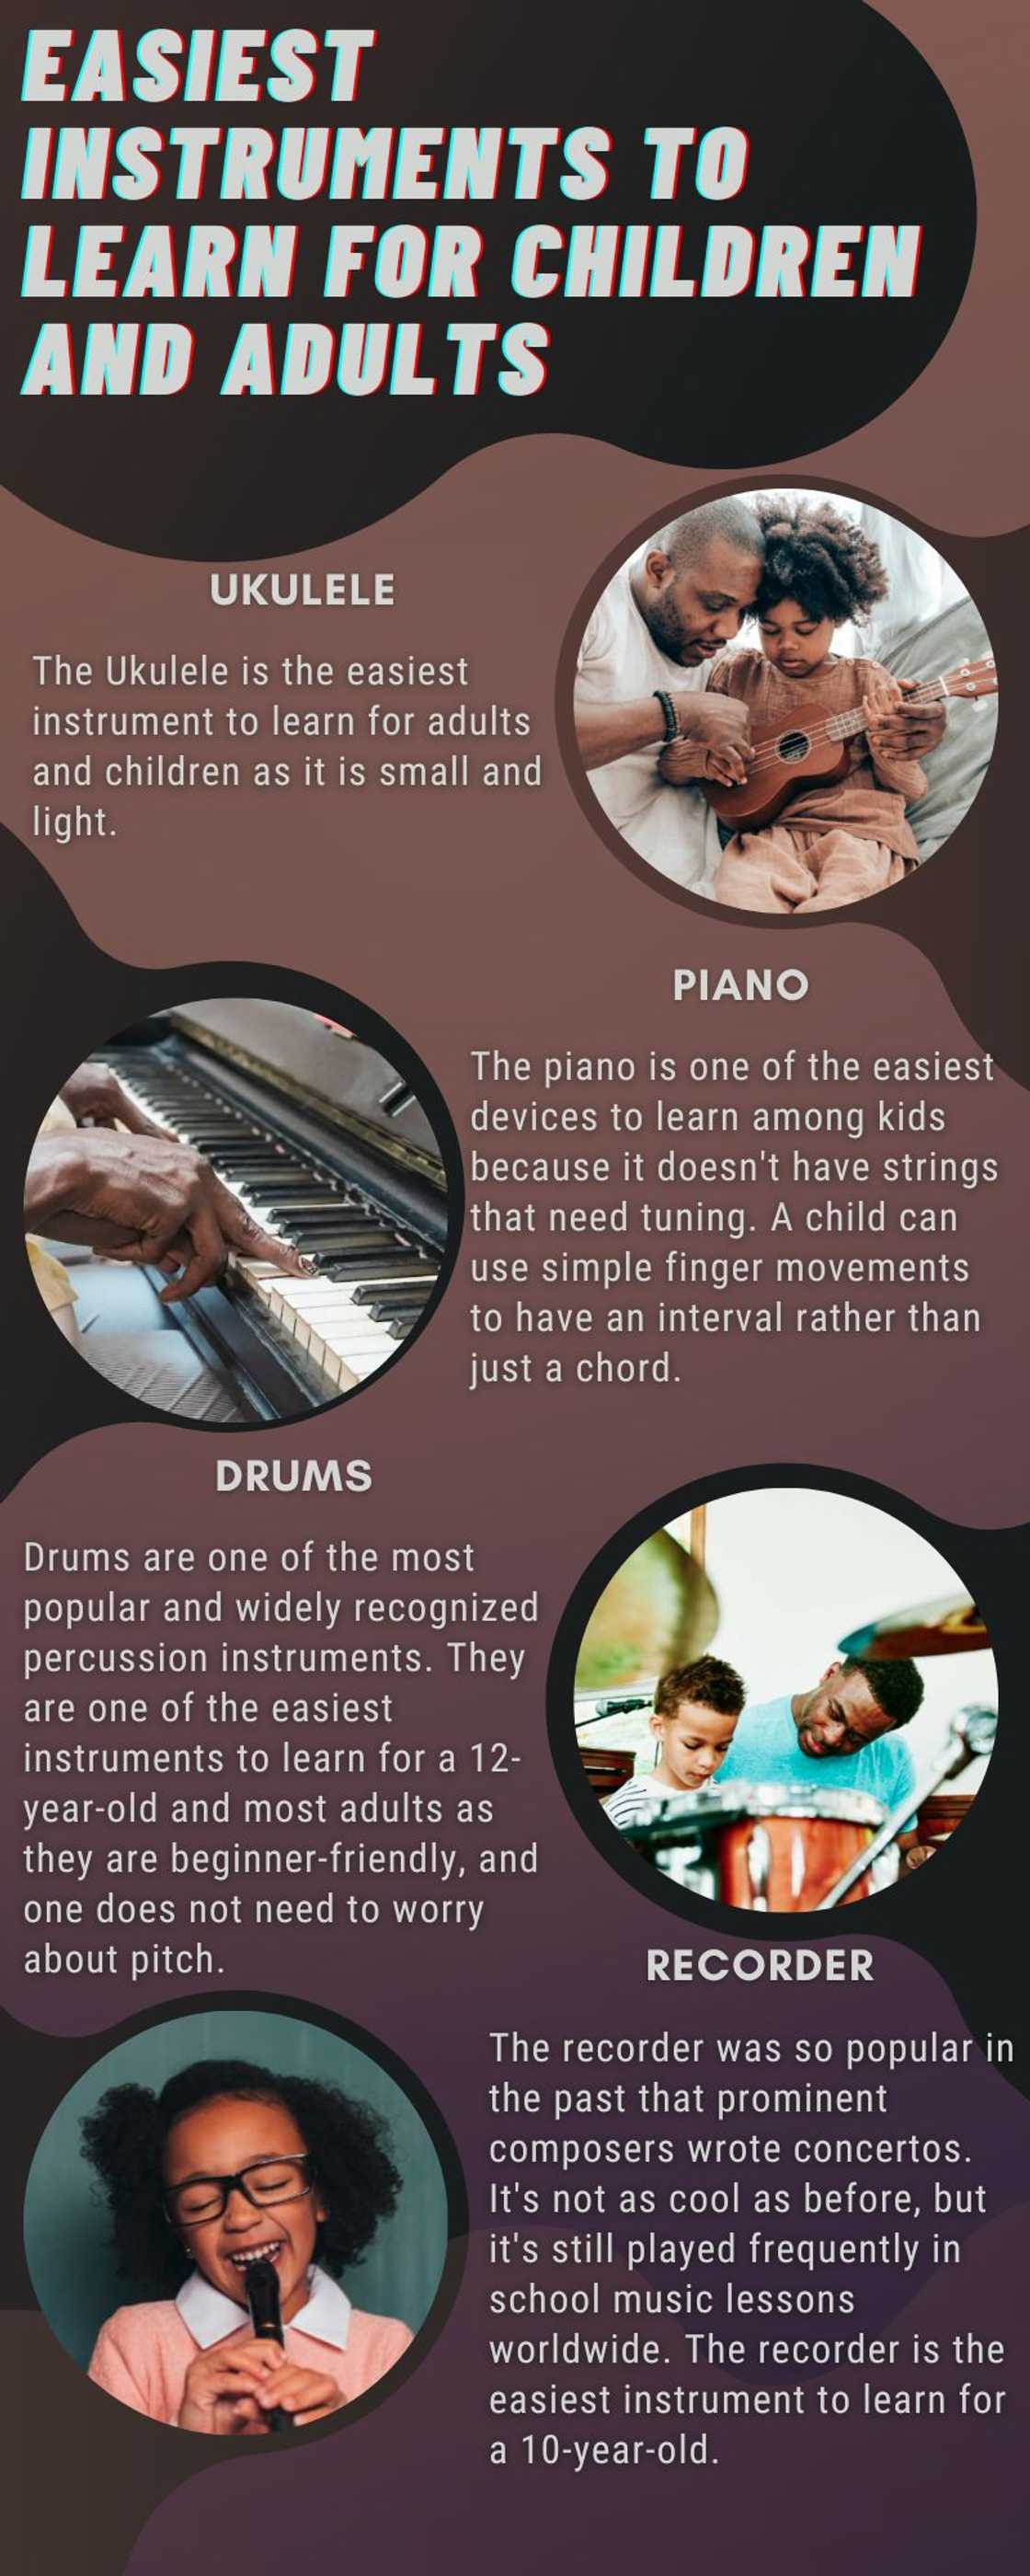 Easiest instruments to learn for children and adults